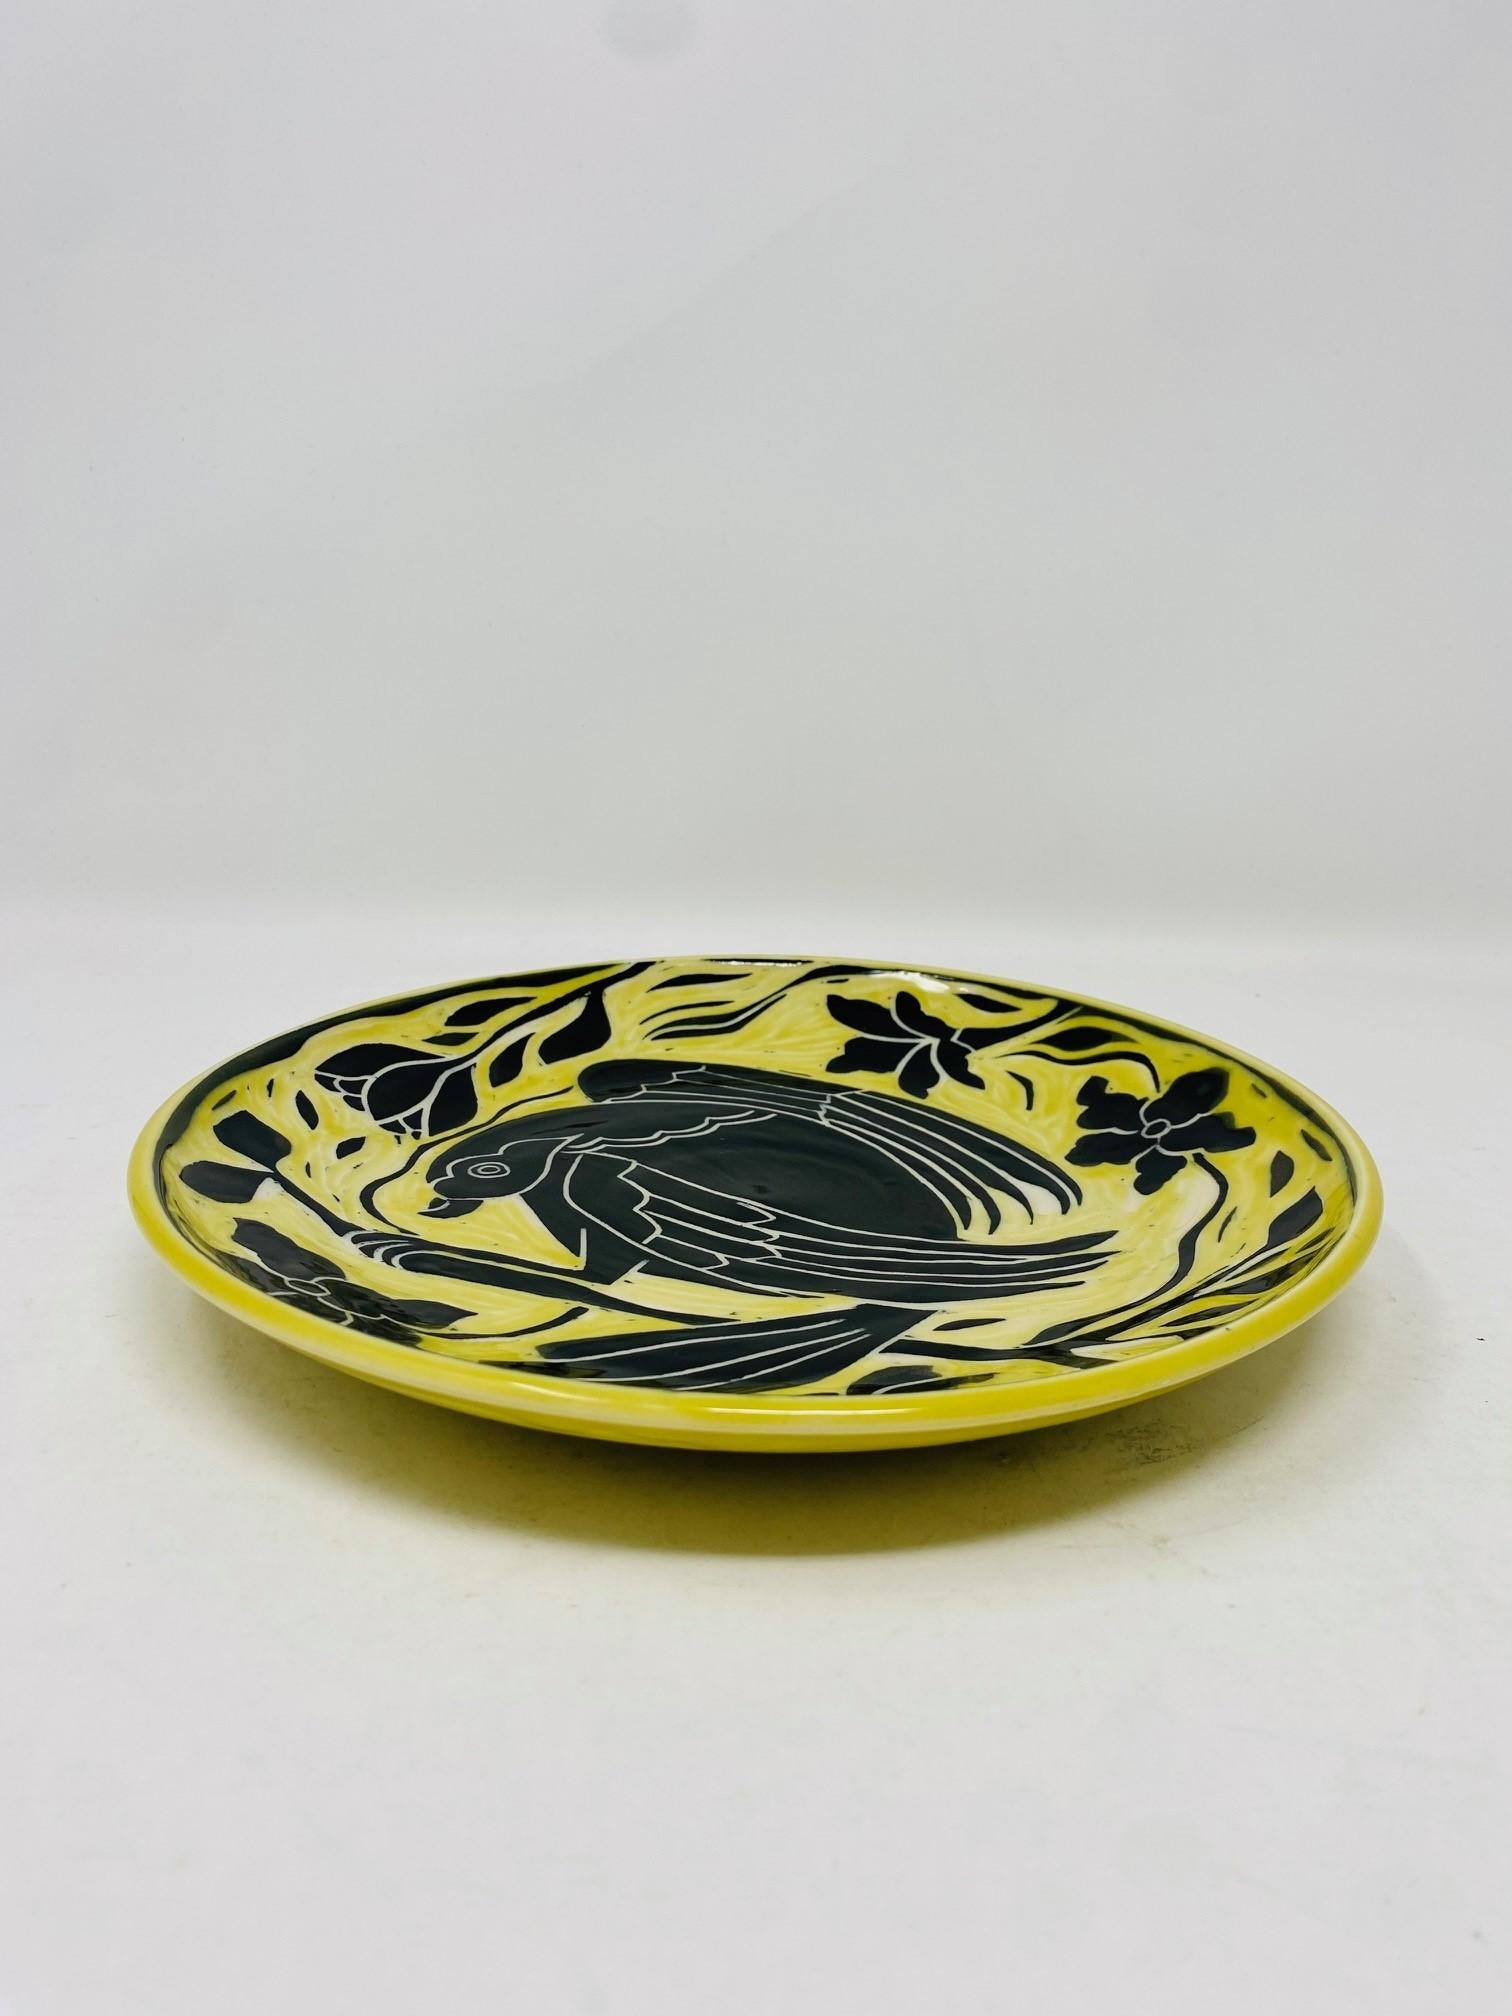 Hand-Crafted Vintage Ceramic Decorative Dish with Bird Figure by Wert Ceramics For Sale